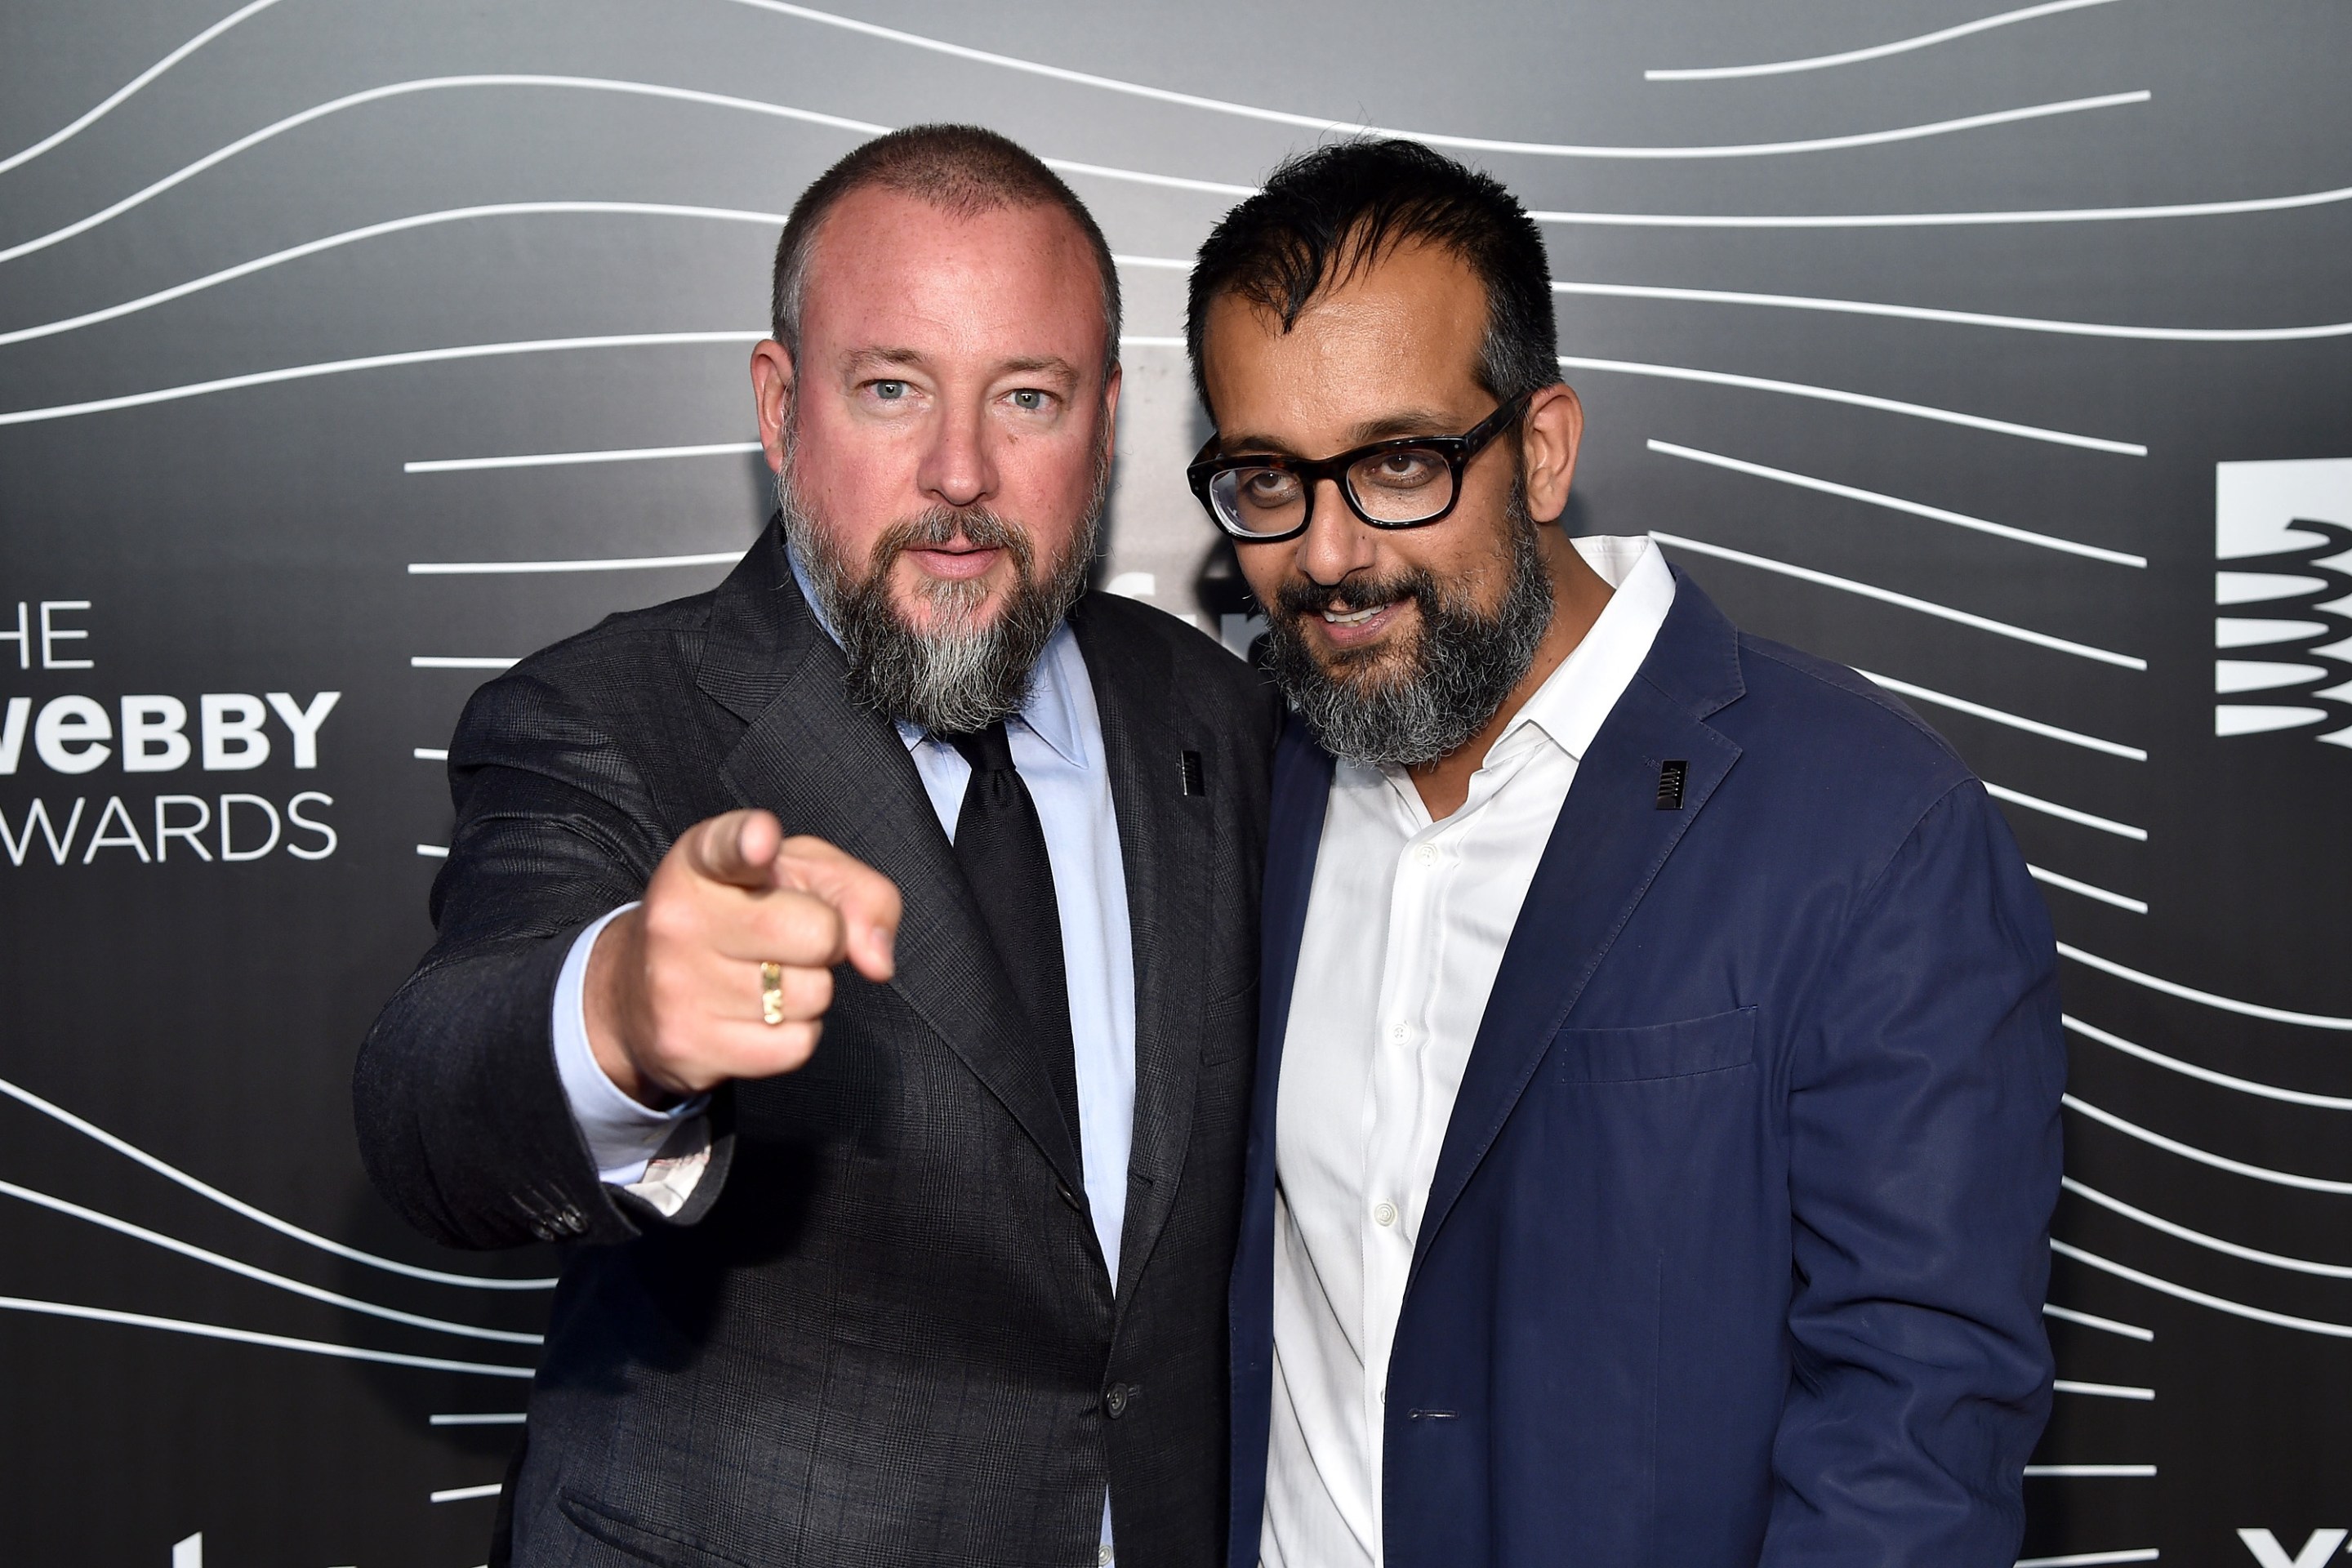 Vice co-founders and executives Shane Smith and Suroosh Alvi looking kind of wet at the 20th Webby Awards in 2016.